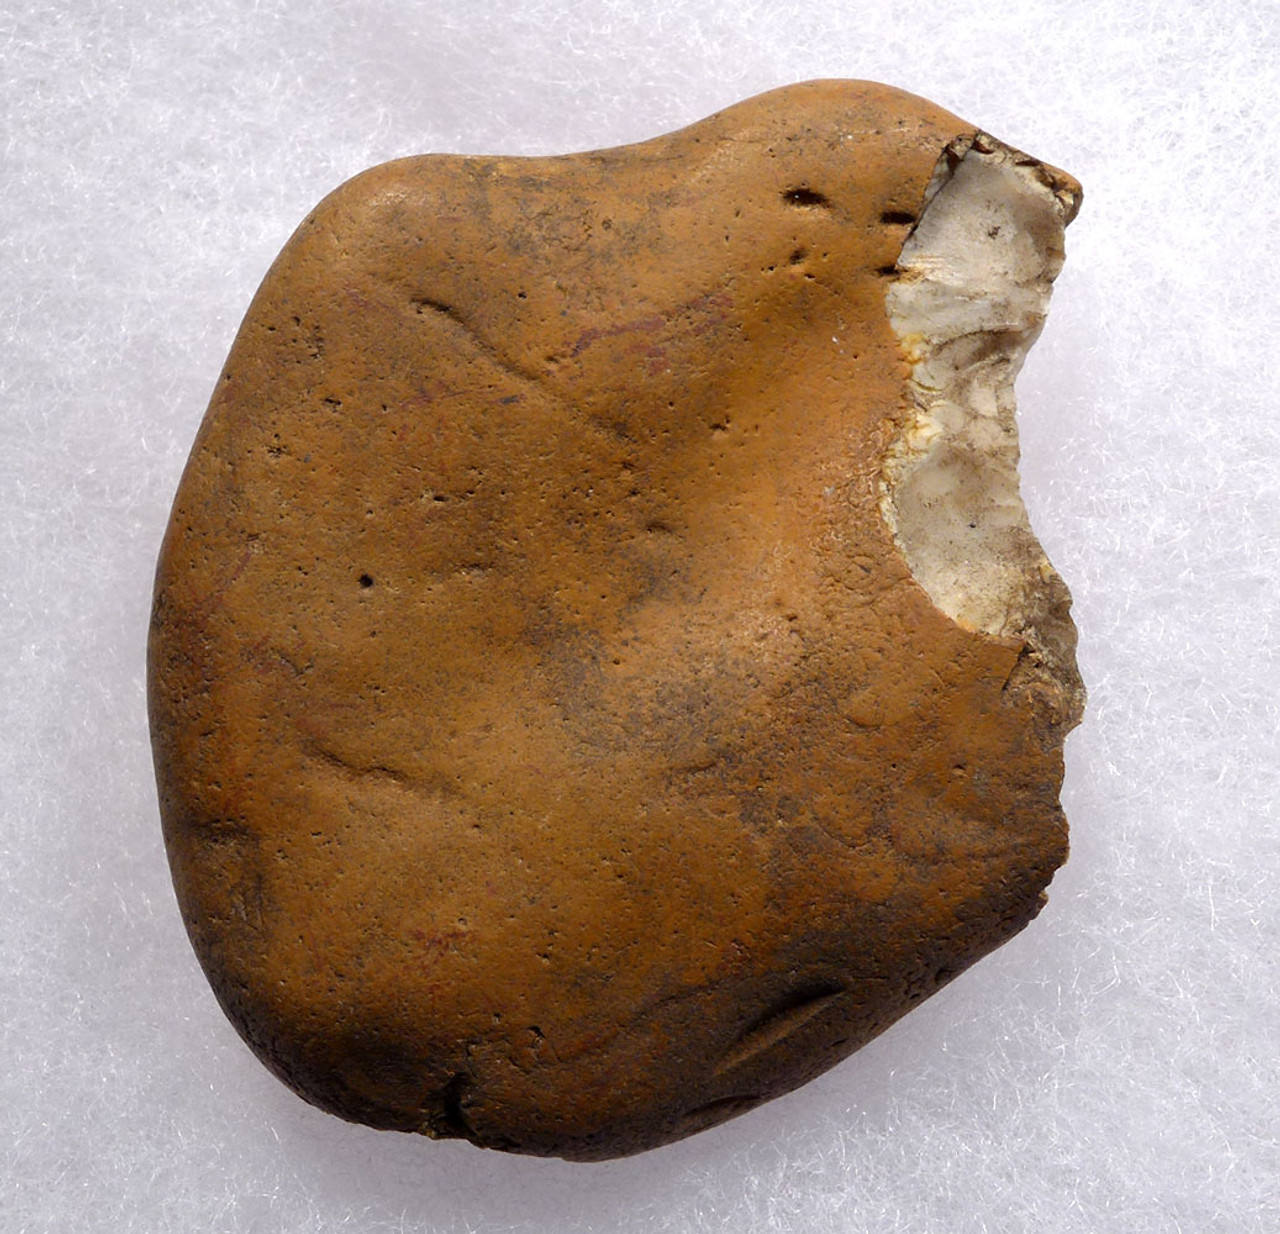 RARE BRITISH OLDOWAN PEBBLE TOOL FROM REGION OF OLDEST HUMAN FOOTPRINTS OUTSIDE OF AFRICA  *PB161